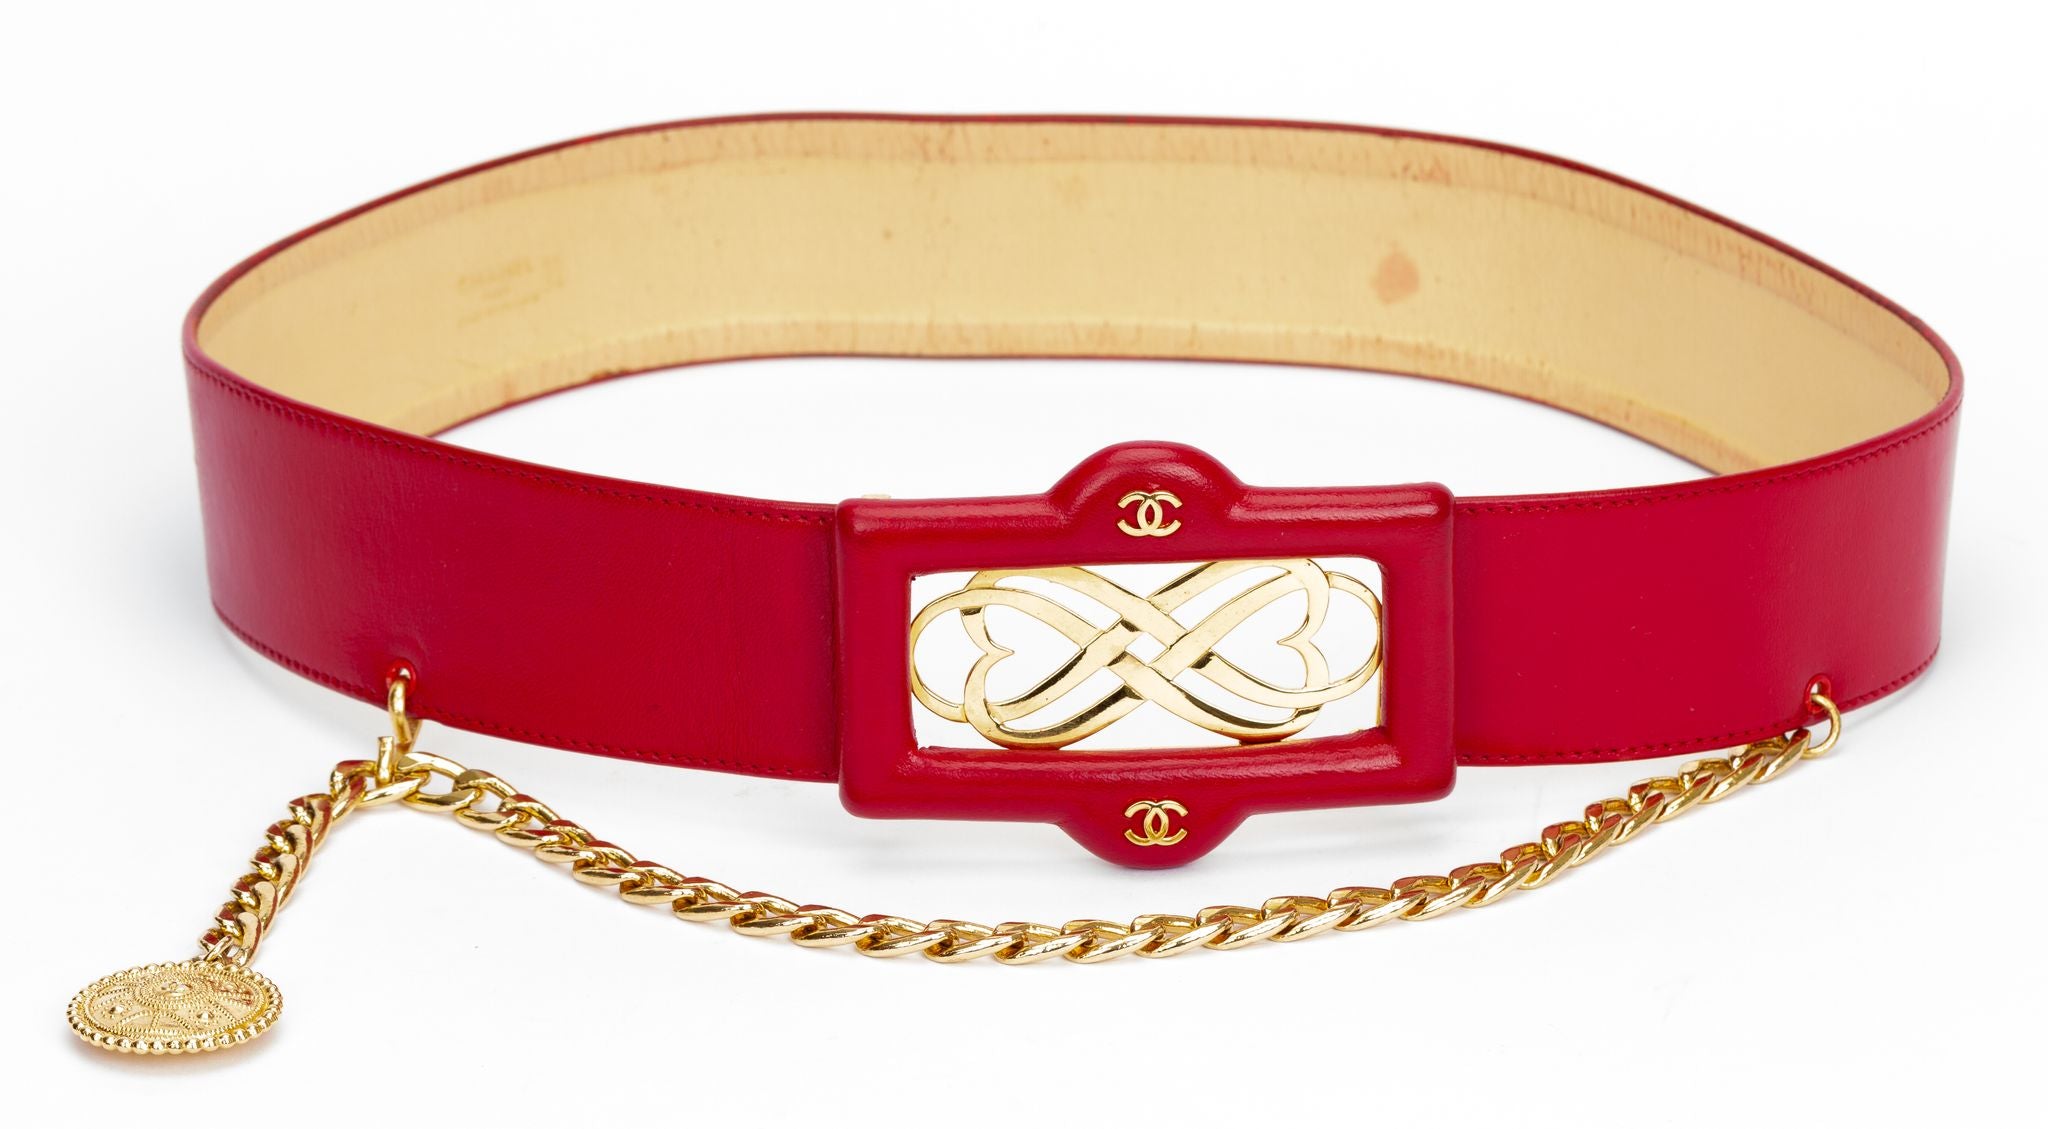 SOLD Chanel wide belt with large CC buckle- large